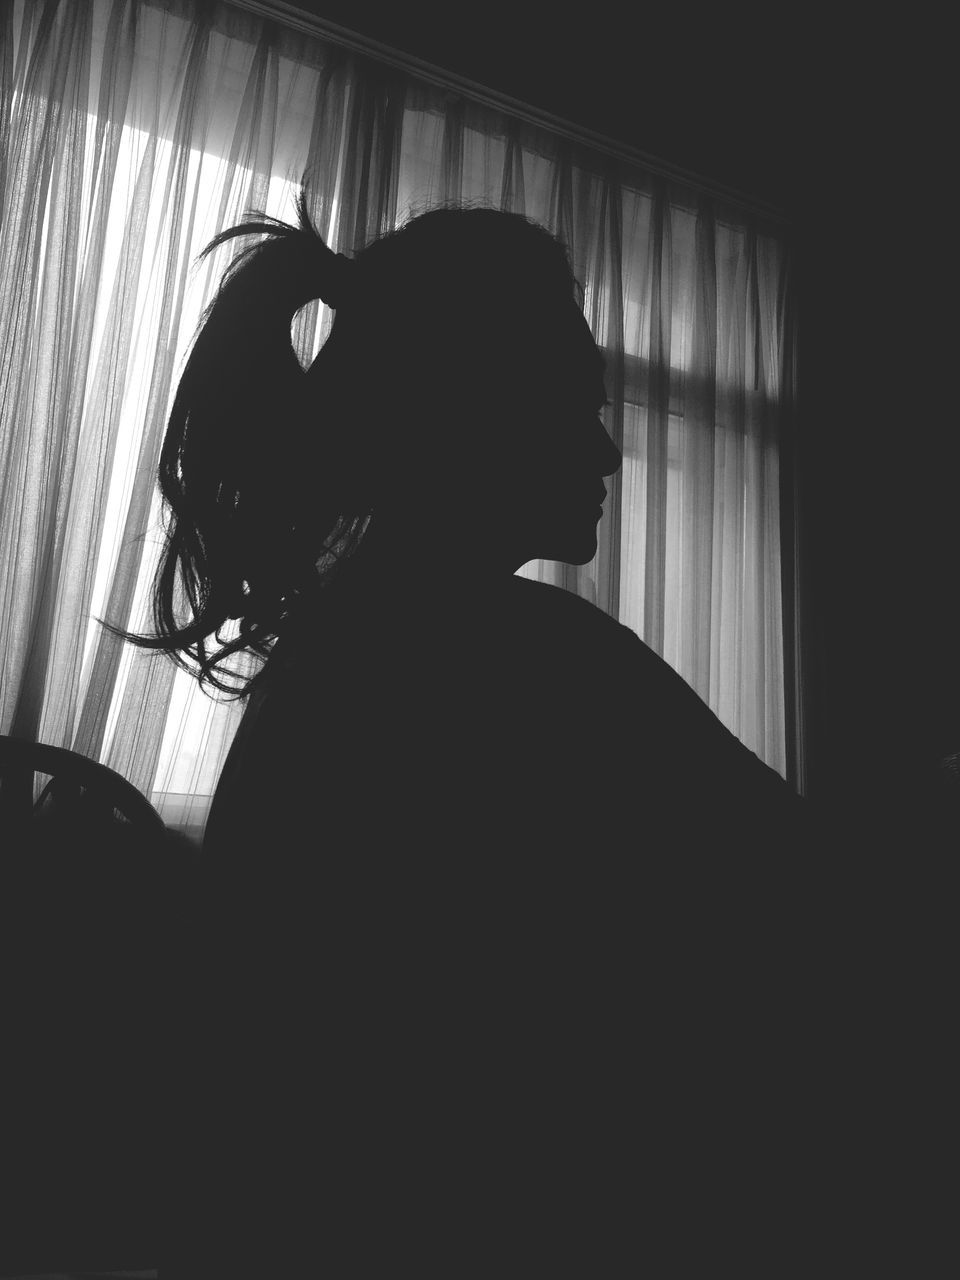 indoors, lifestyles, window, home interior, leisure activity, young adult, silhouette, contemplation, young women, curtain, dark, domestic room, side view, person, standing, wall - building feature, waist up, three quarter length